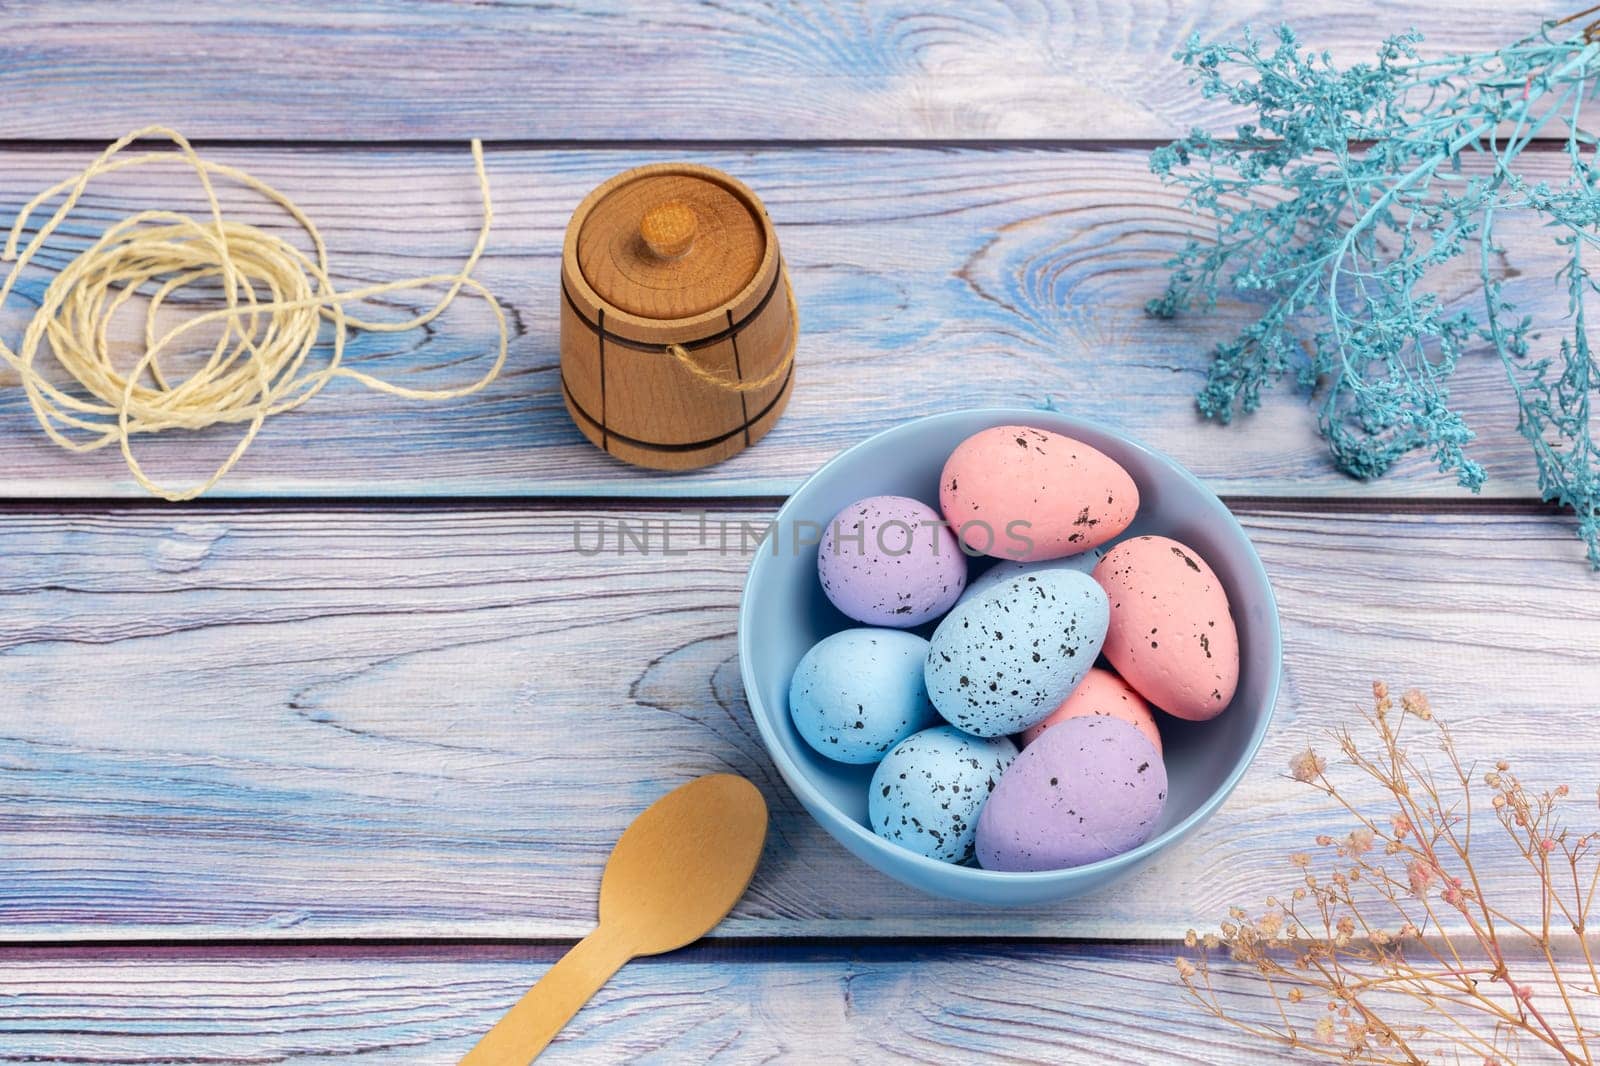 Bowl with colored Easter eggs, a small wooden barrel, a wooden spoon and a rope on the boards with decorative plants. Top view.